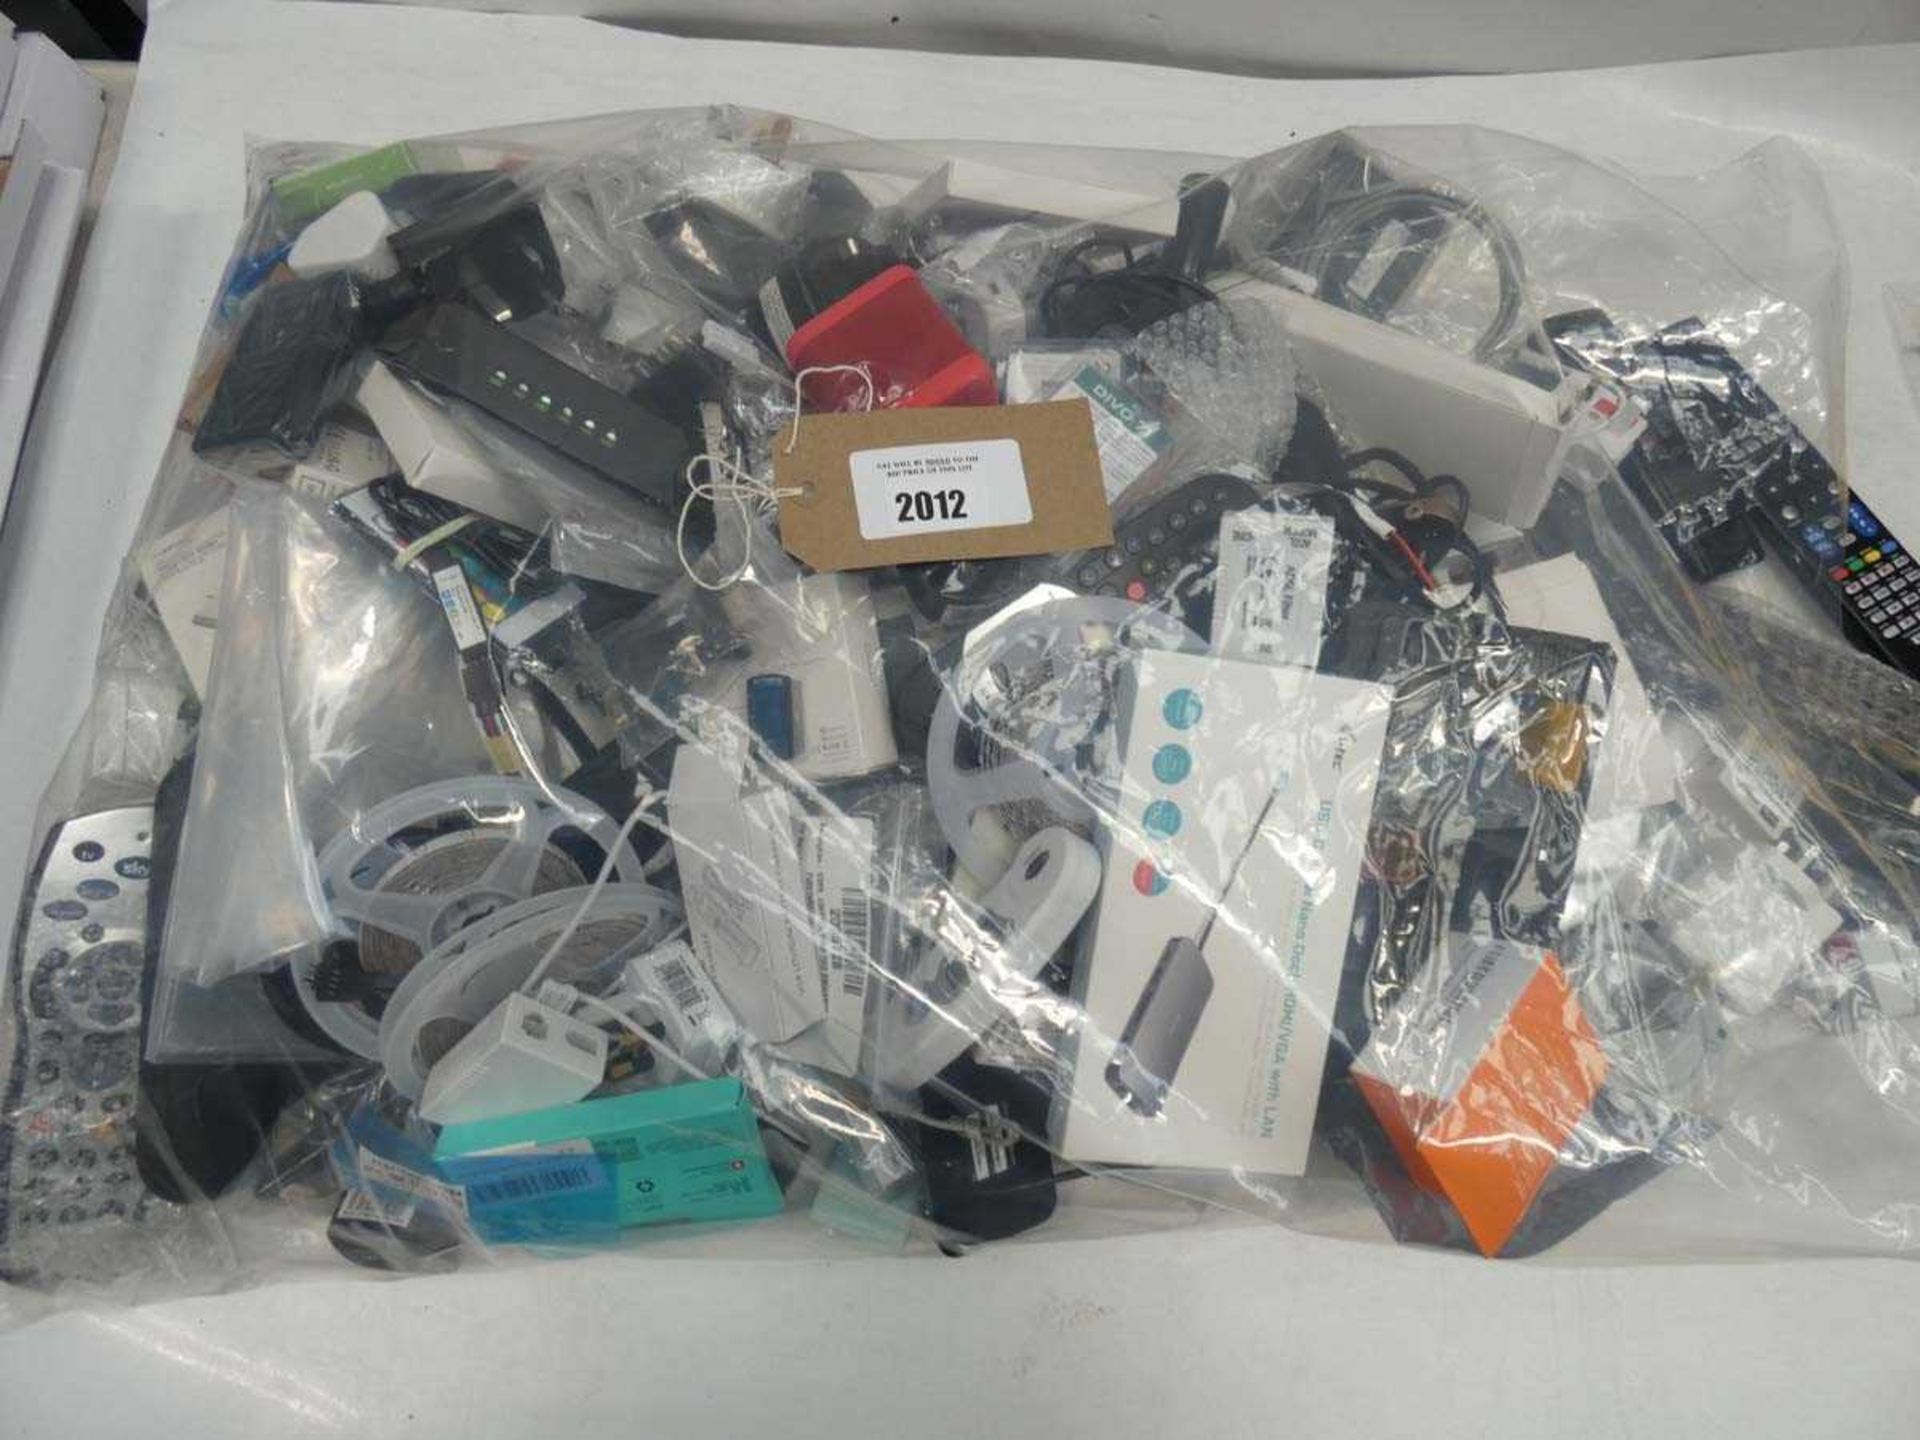 +VAT Mixed lot containing sundries and electrical devices/accessories; remotes, adapters, LED